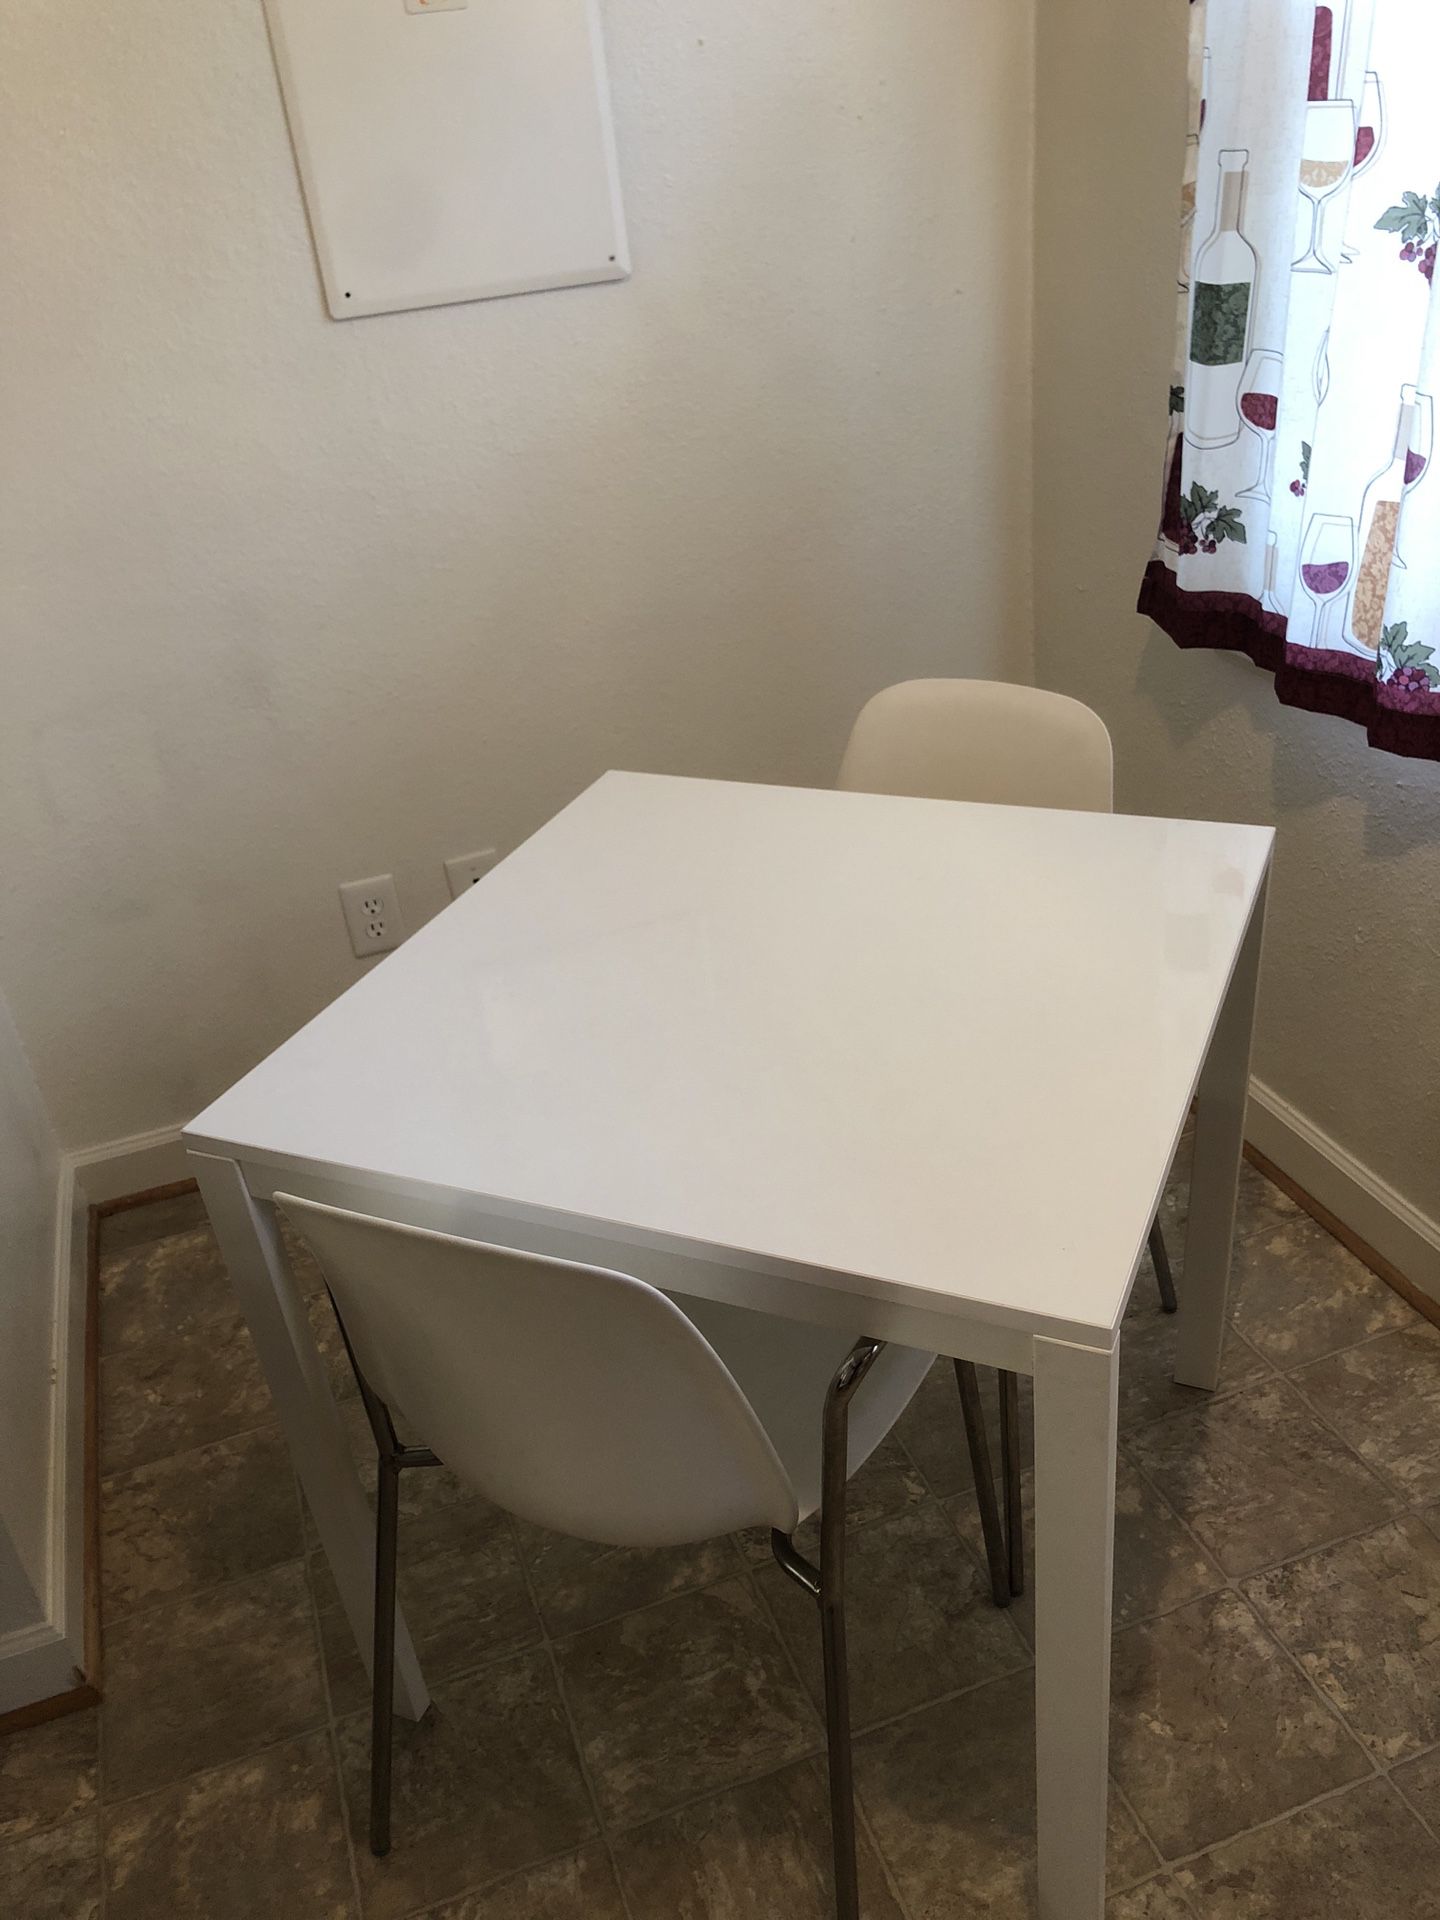 Kitchen Table and 2 chairs